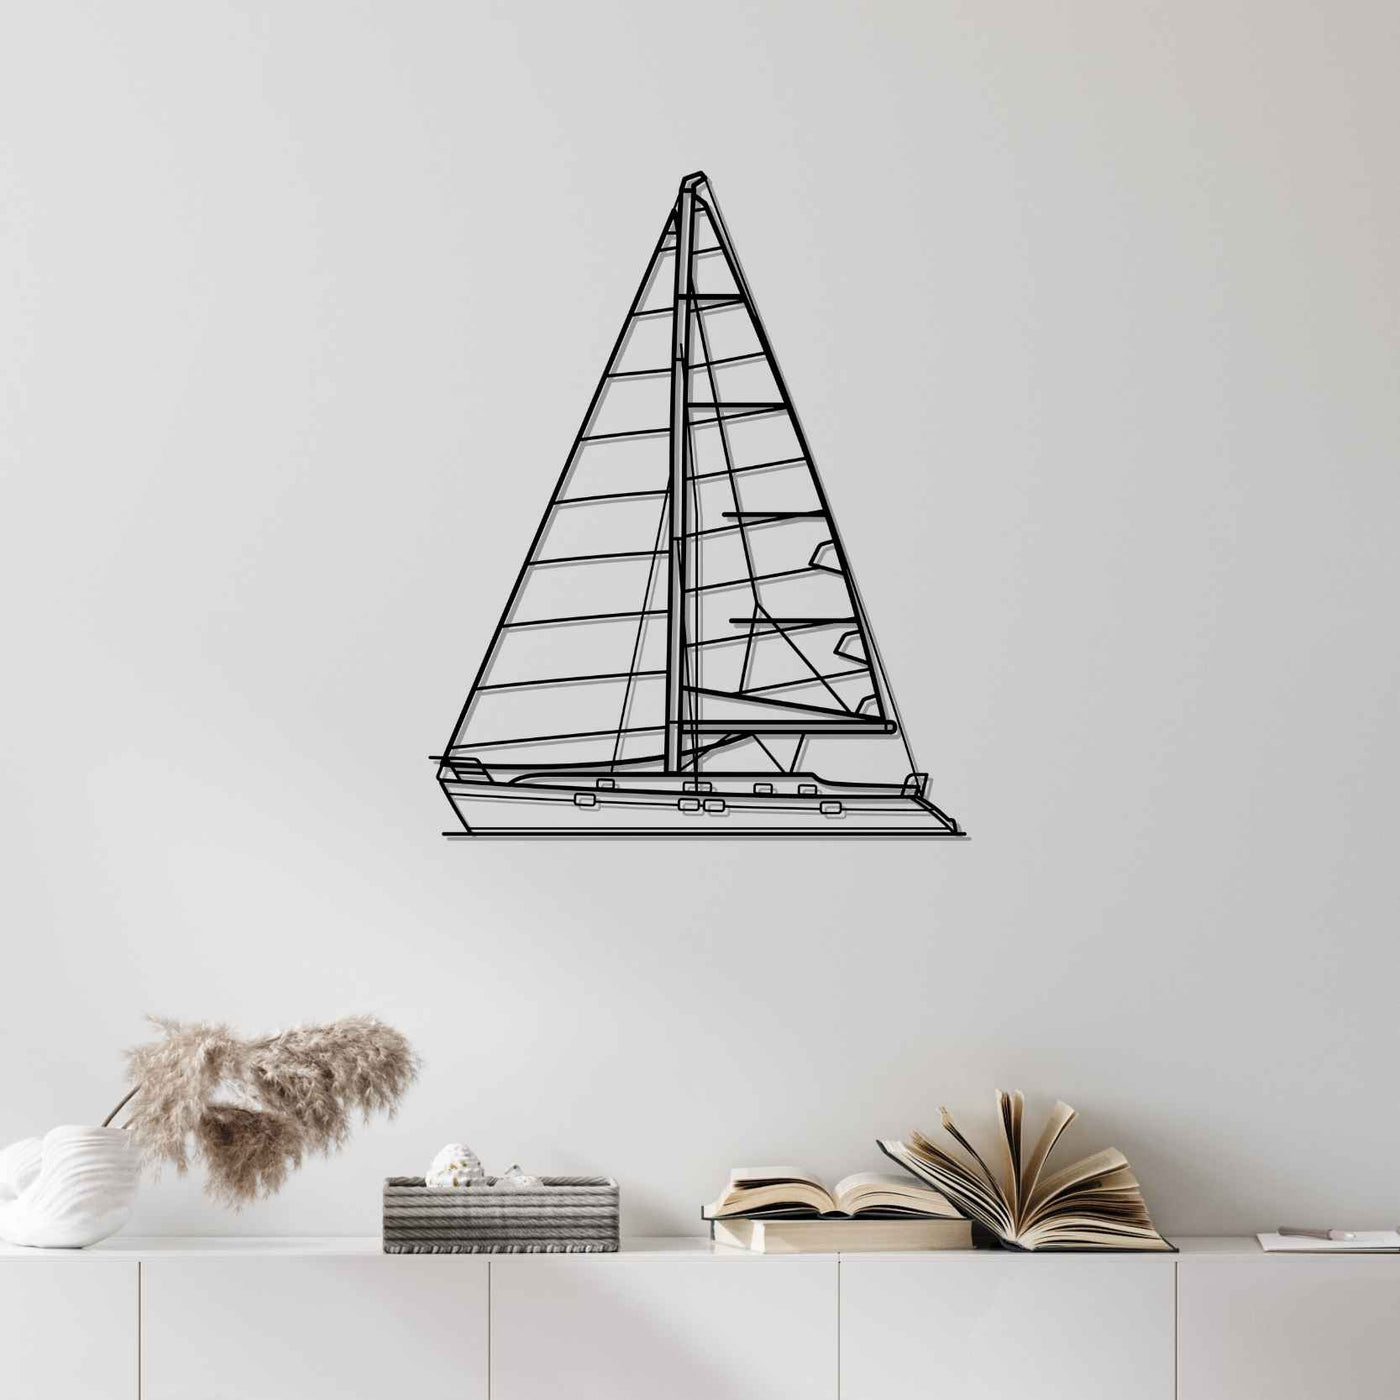 Oceanis 411 Clipper Front Silhouette Metal Wall Art